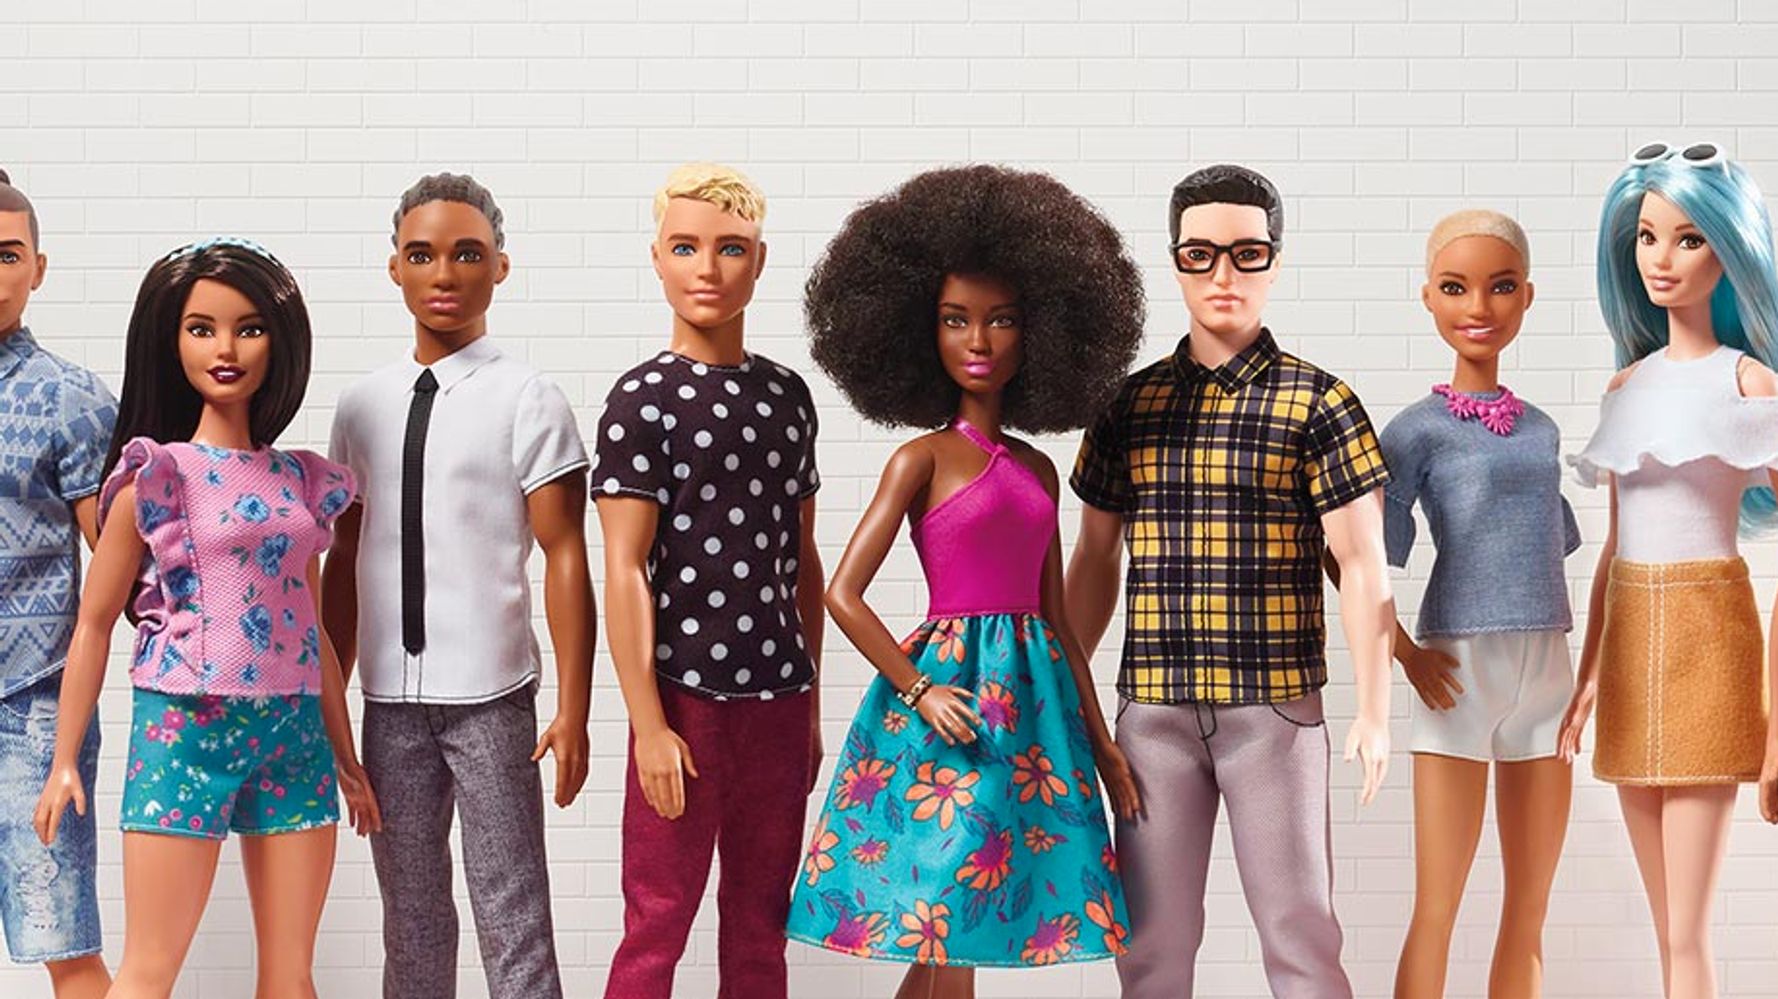 40 New Barbie And Ken Dolls Launched By Mattel With